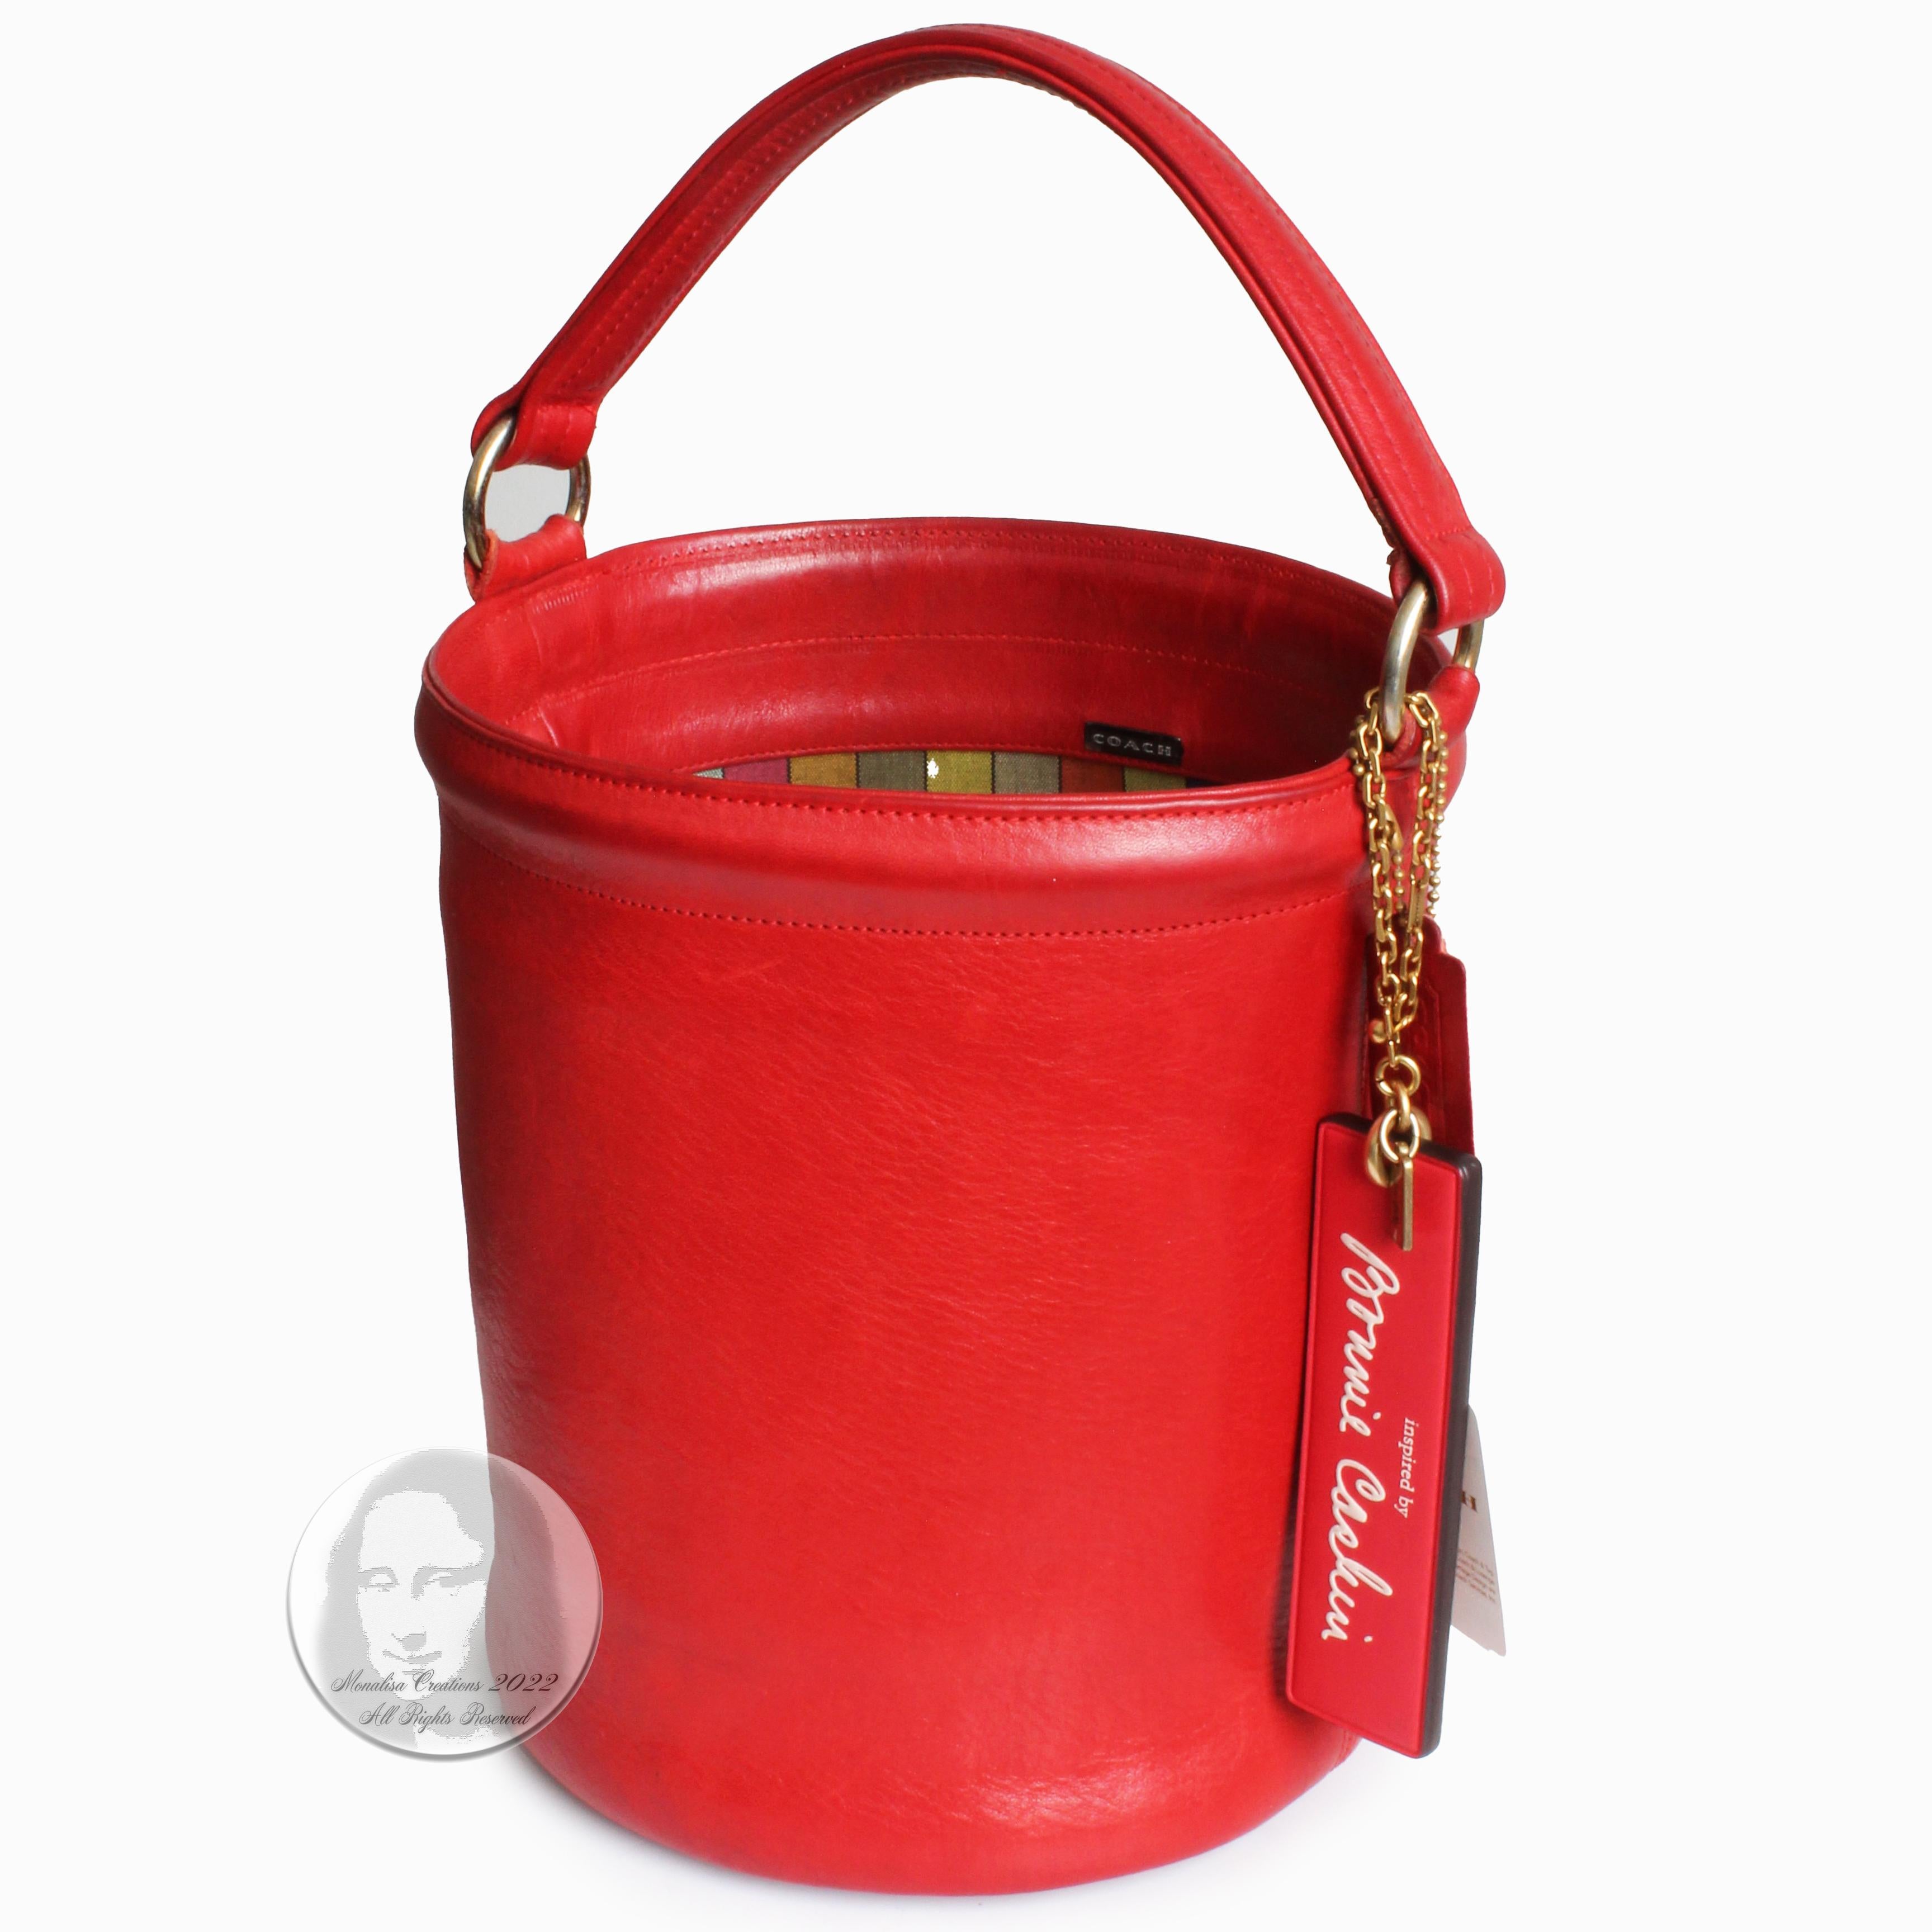 Bonnie Cashin for Coach Feed Bag Bucket Tote Red Leather Vintage 1960s Rare  1